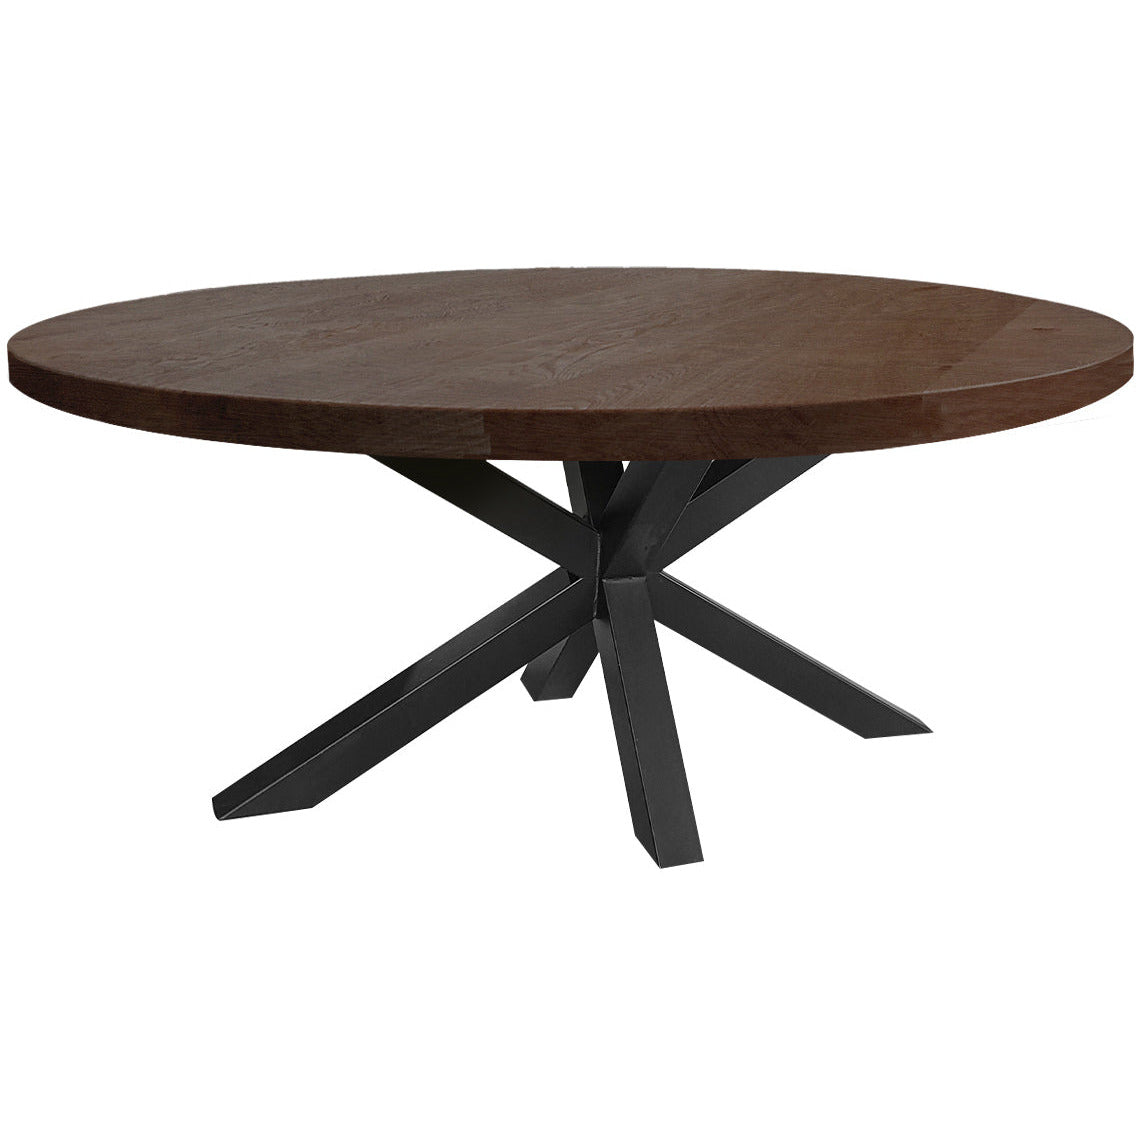 Dining table | Oval | Dark brown | Oak wood | Lacquered | Spiderpaw